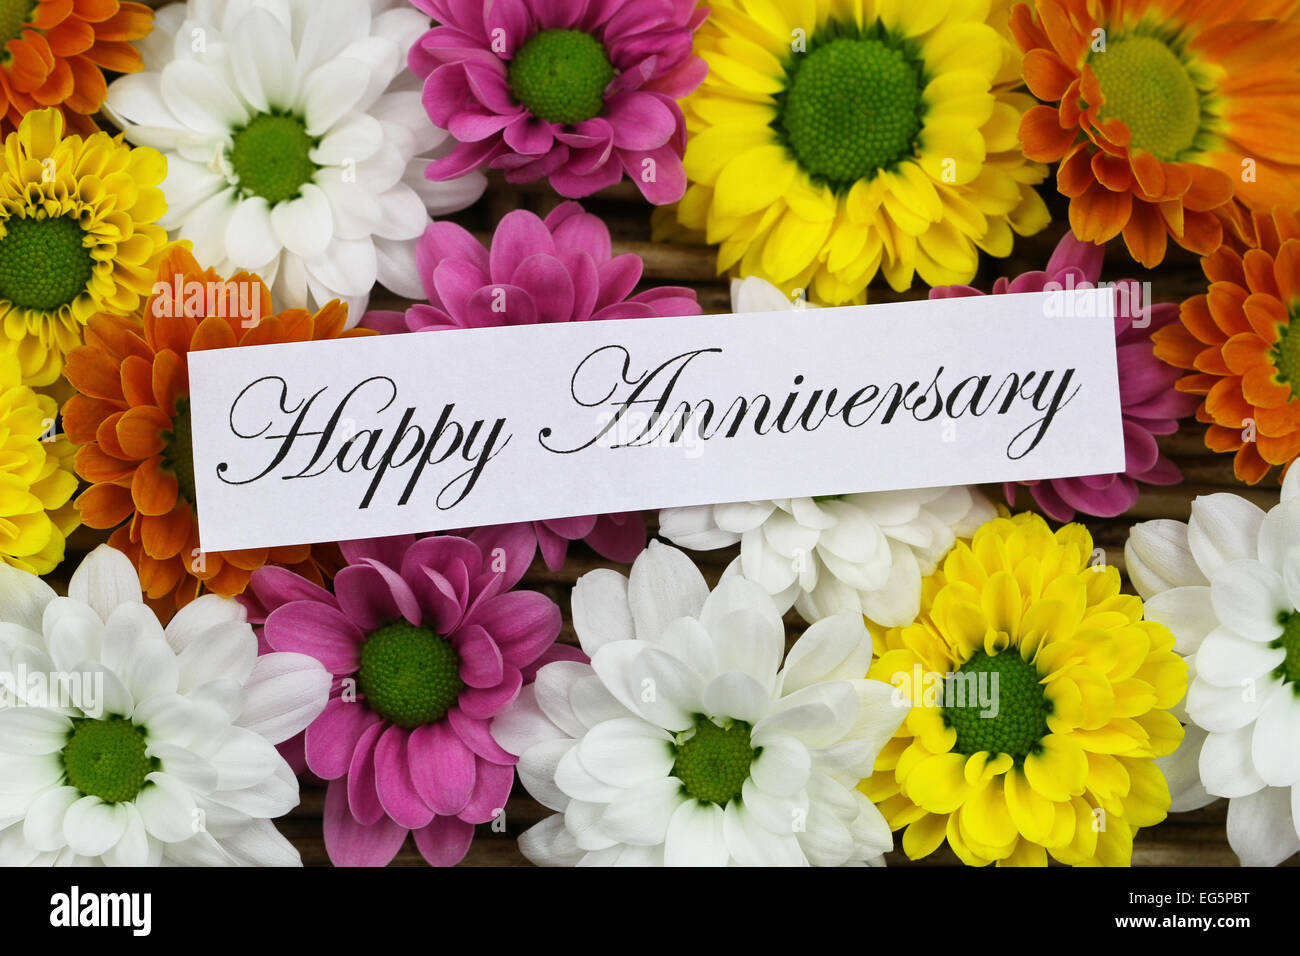 happy anniversary card with colorful santini flowers EG5PBT